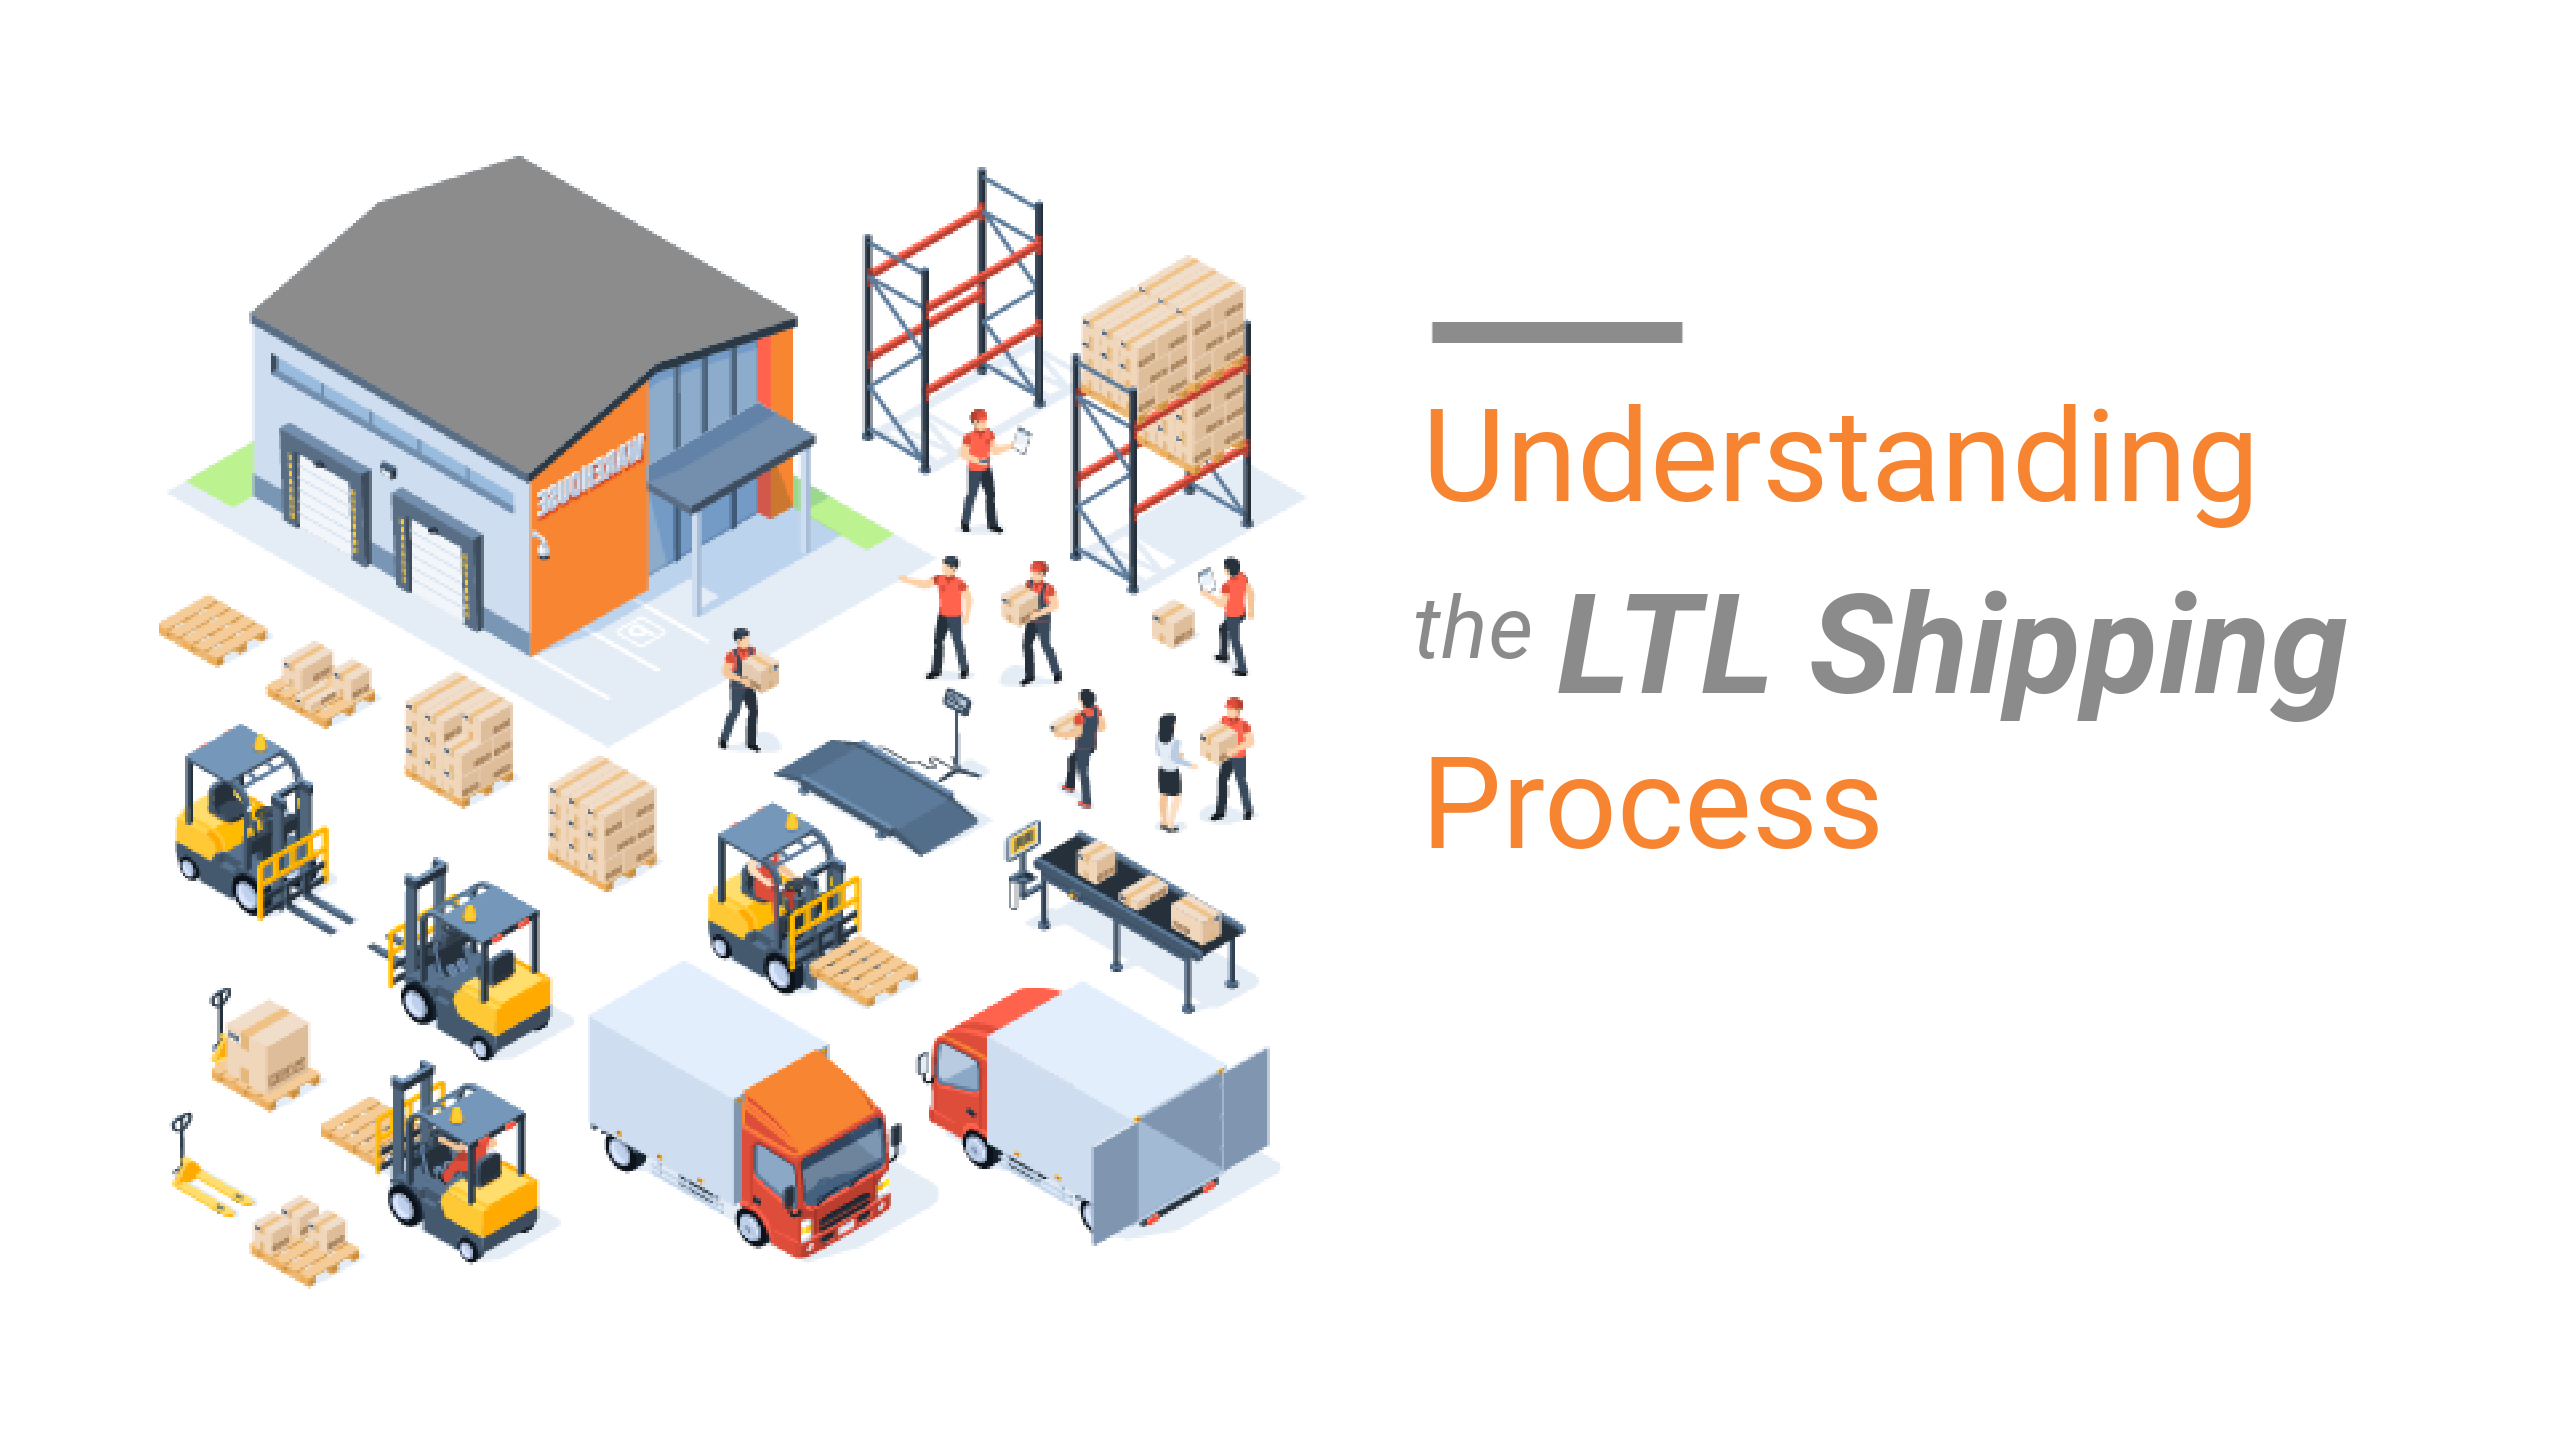 What Does the LTL Shipping Process Look Like?